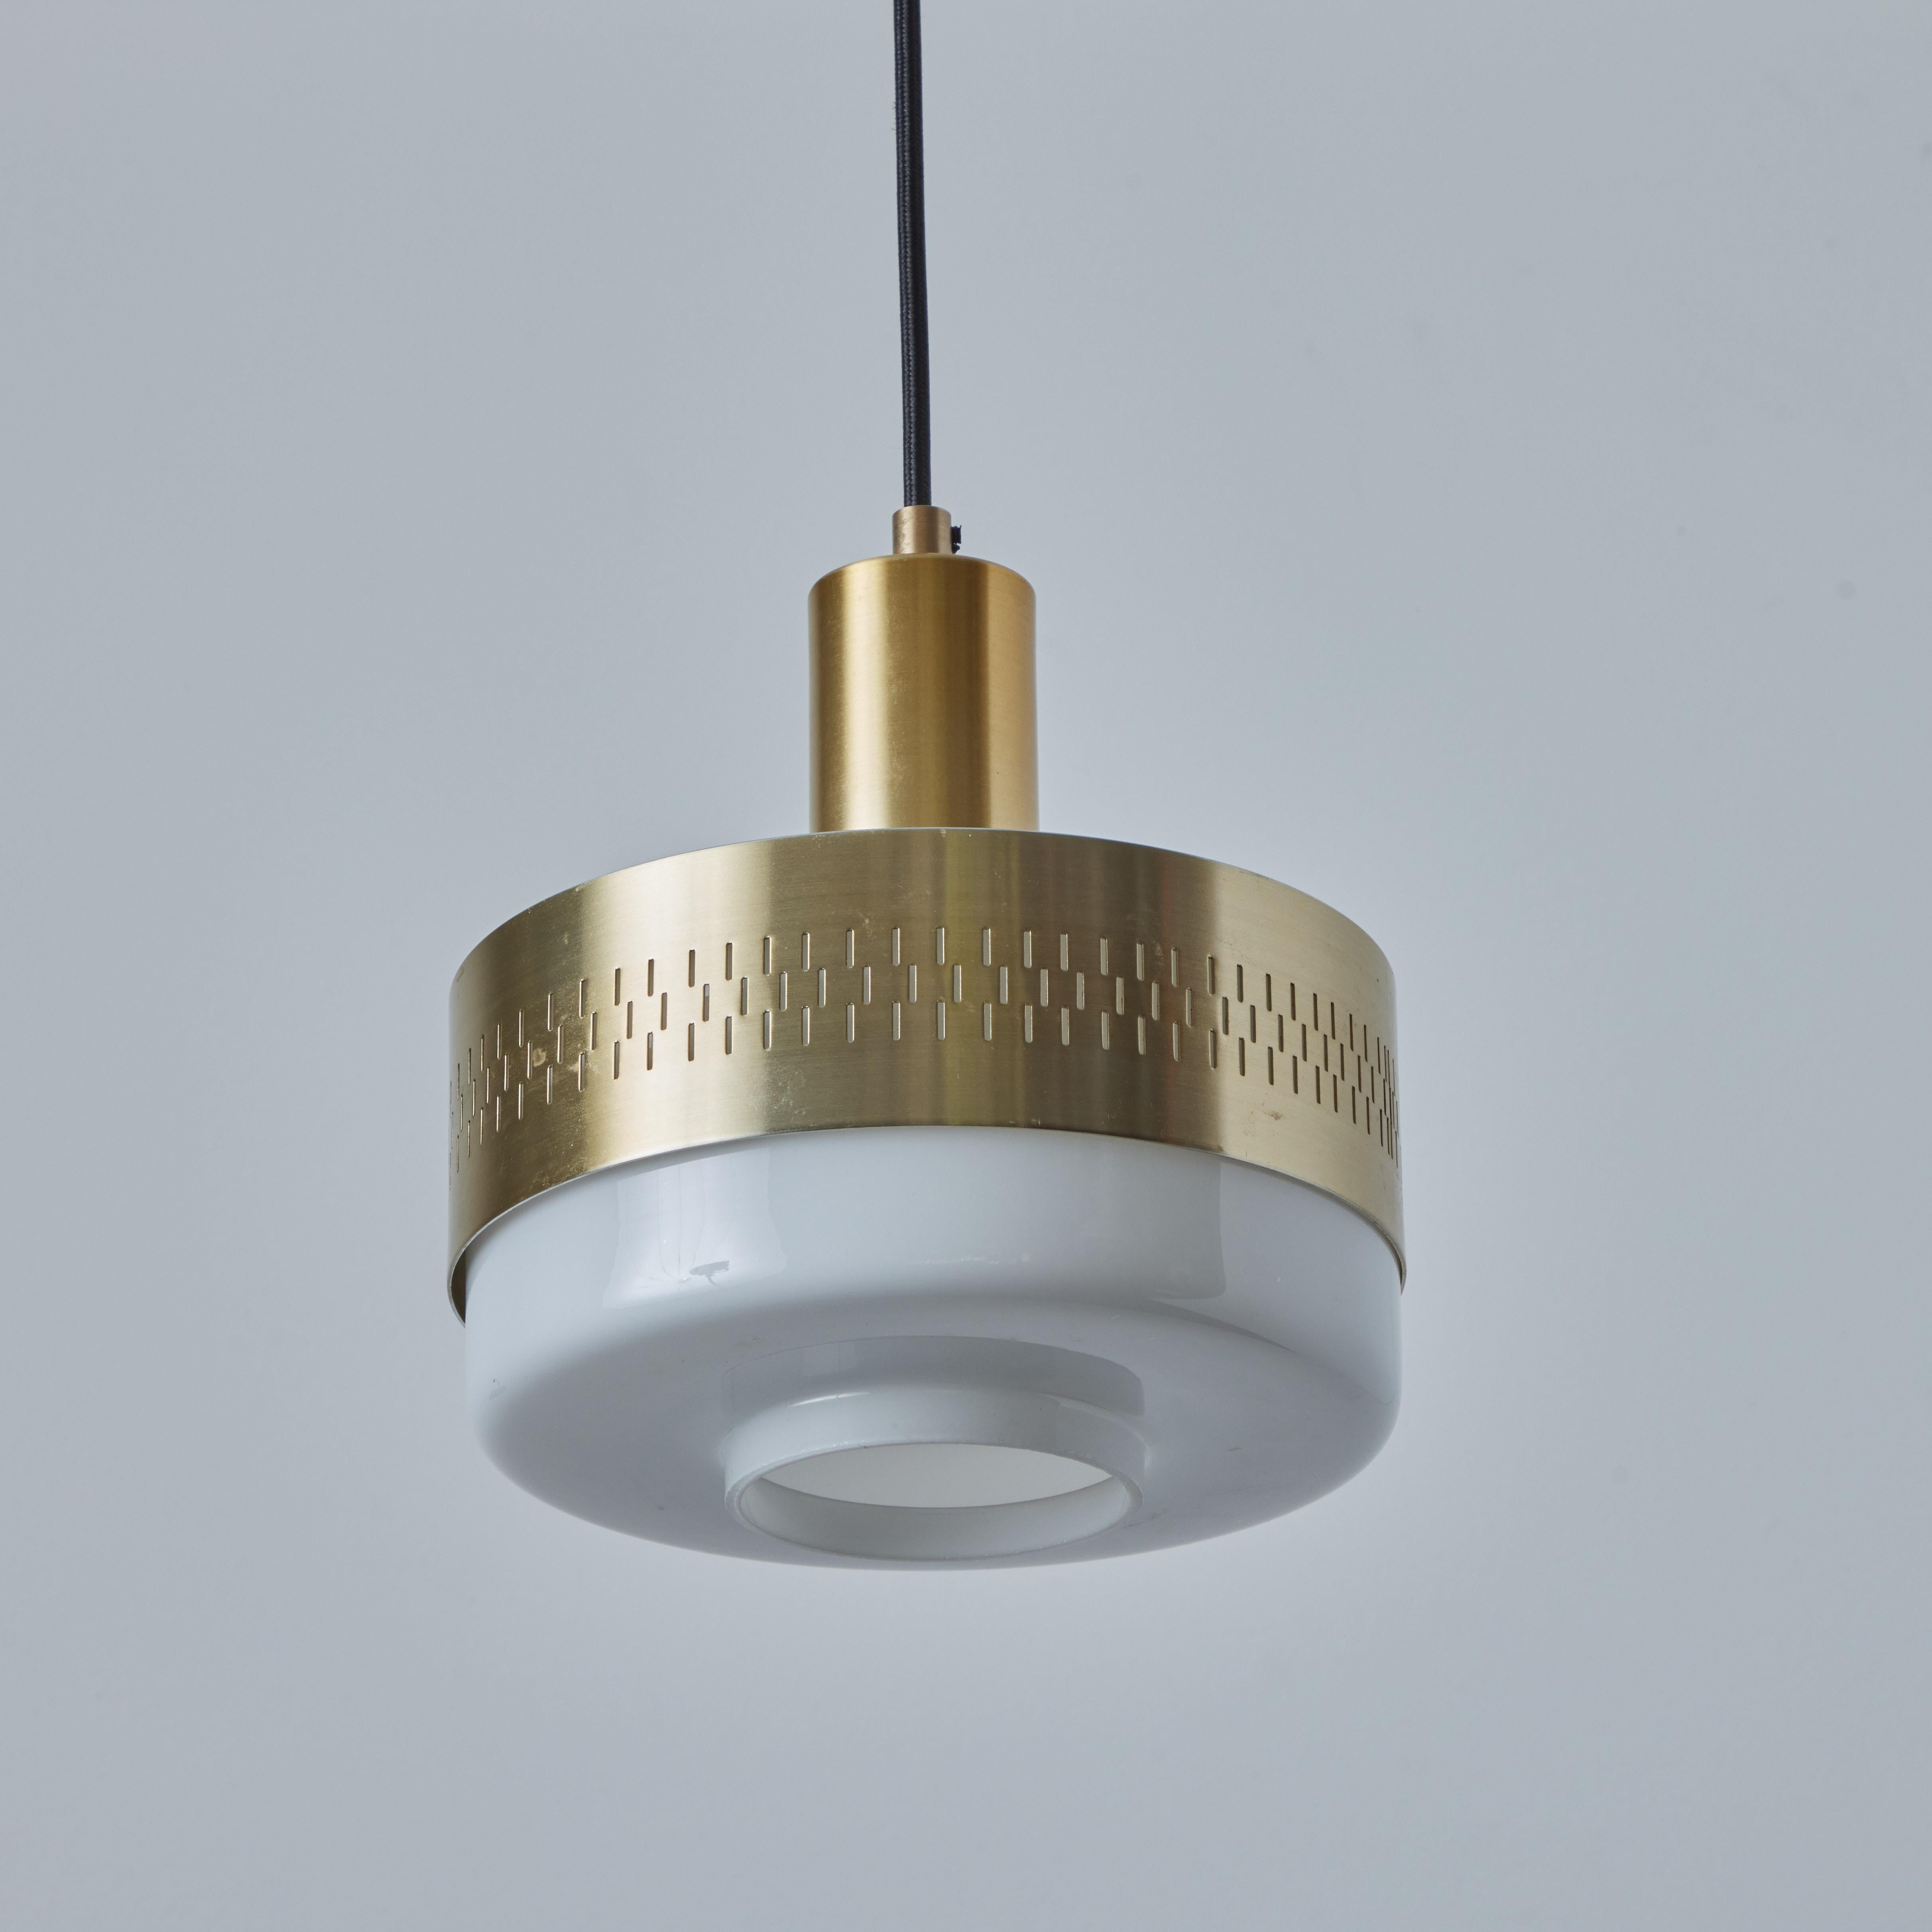 1960s Perforated Brass & Glass Pendant Attributed to Hans-Agne Jakobsson For Sale 4